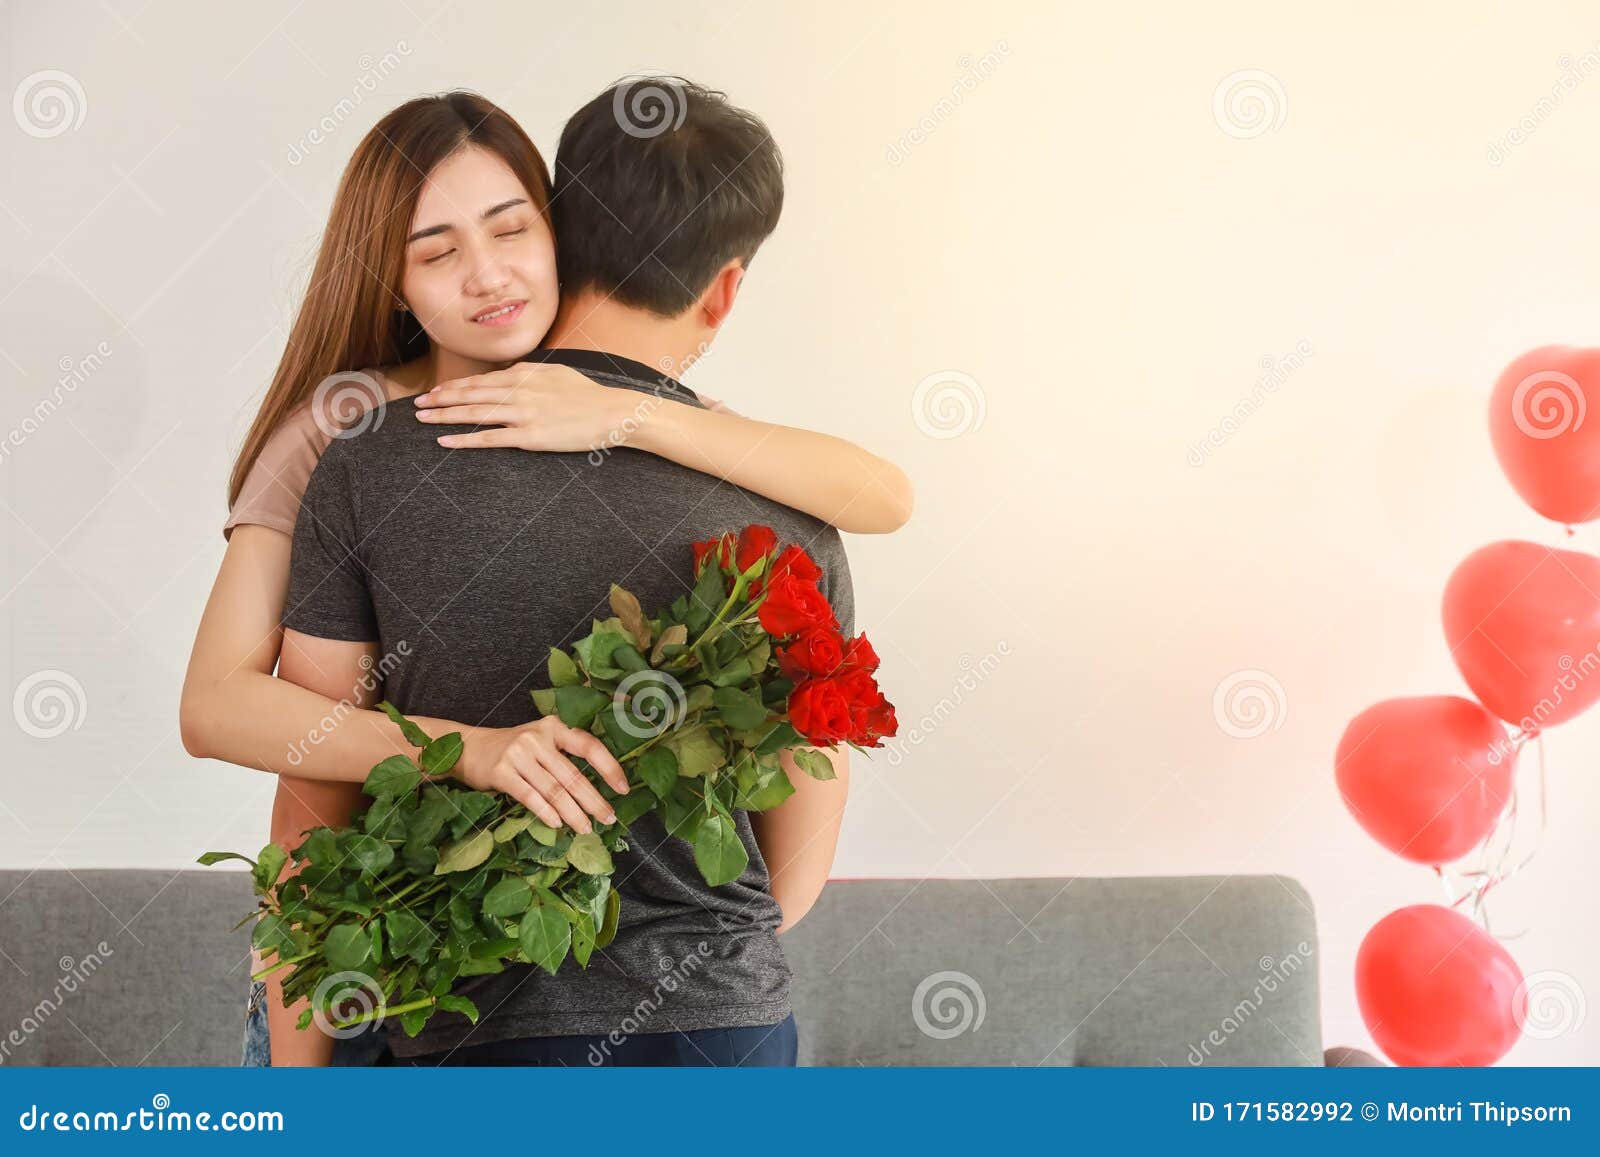 an person day asian Hug